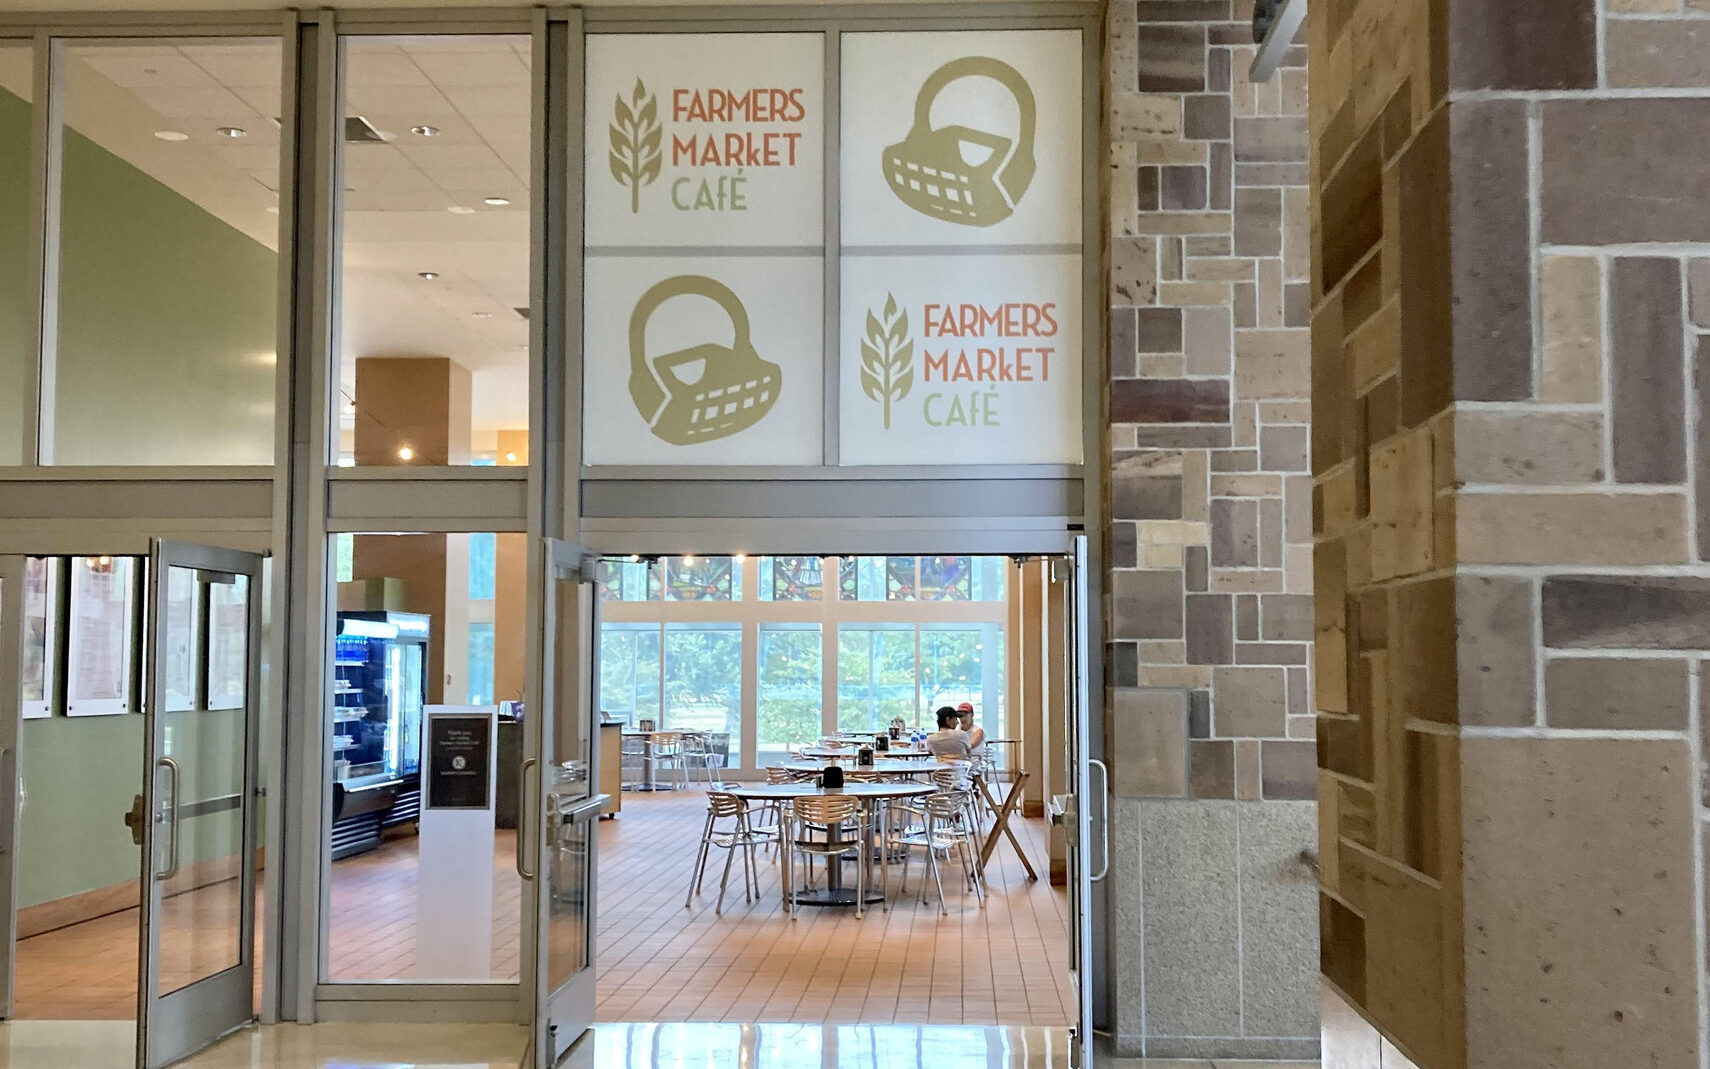 The entryway to the market cafe at the Indiana State Museum